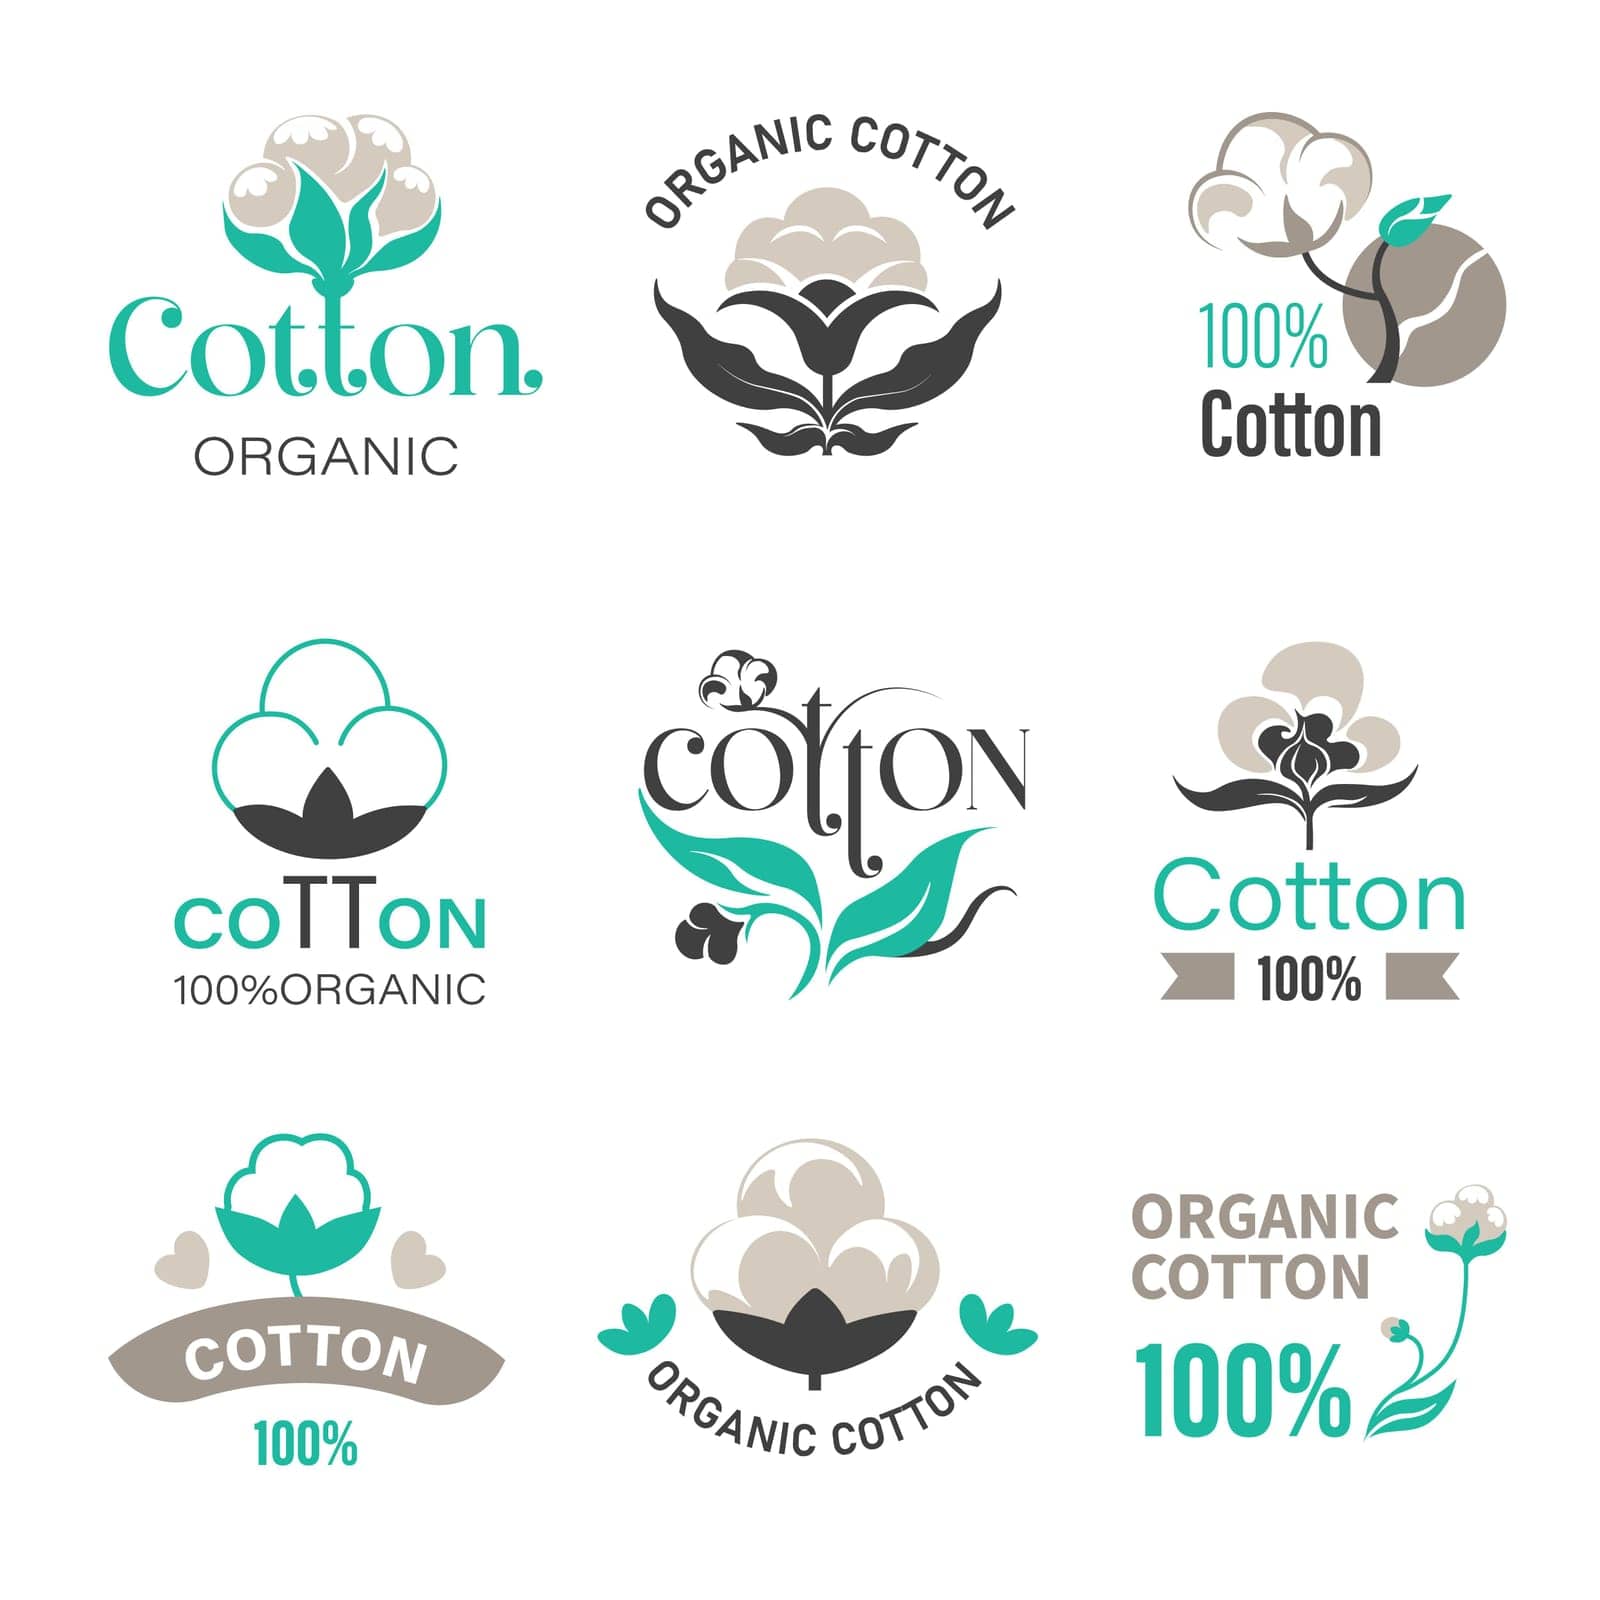 Organic cotton, textile and fabric material logo by Sonulkaster